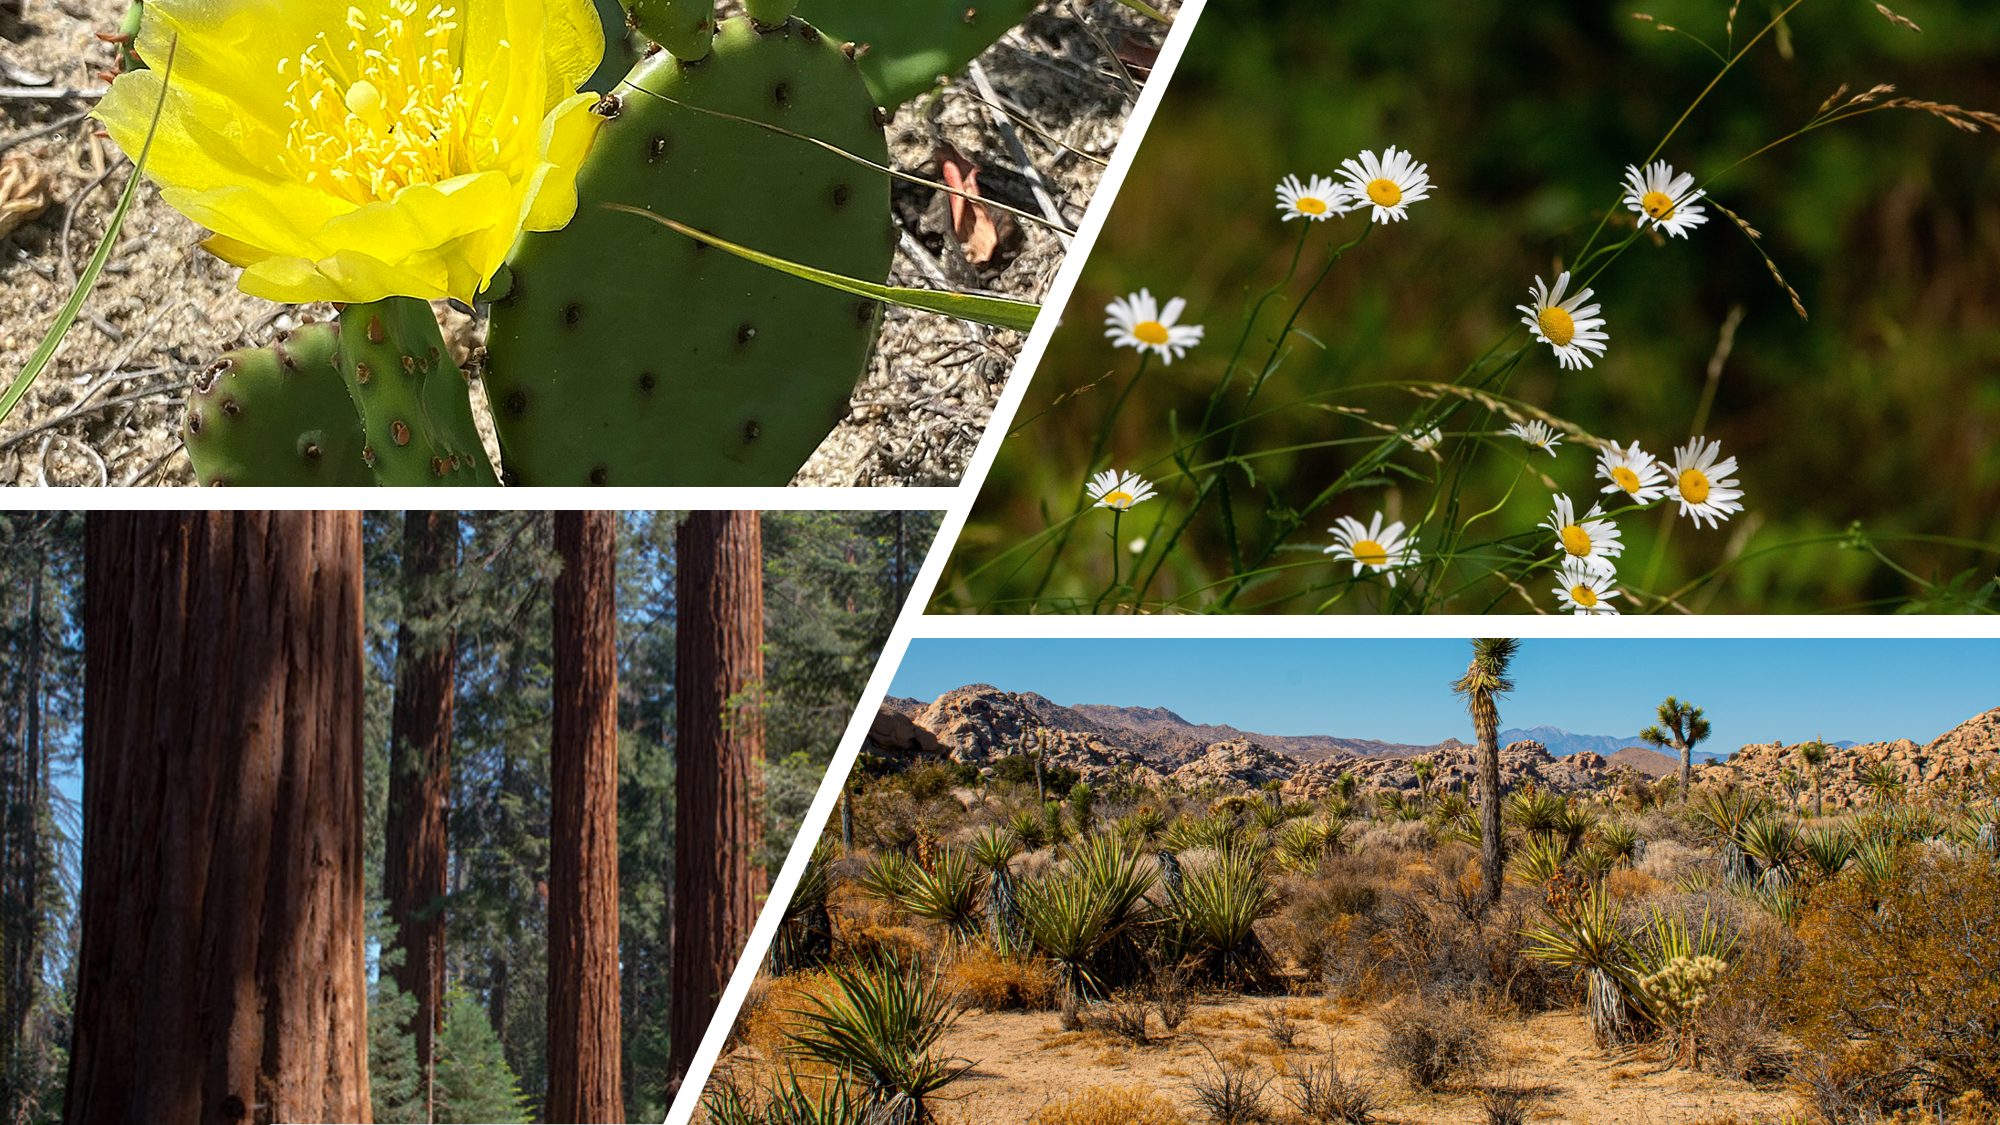 A slanted grid showing four plant types, a flowering cactus, small delicate flowers, tall redwood trees, and a scrub desert field